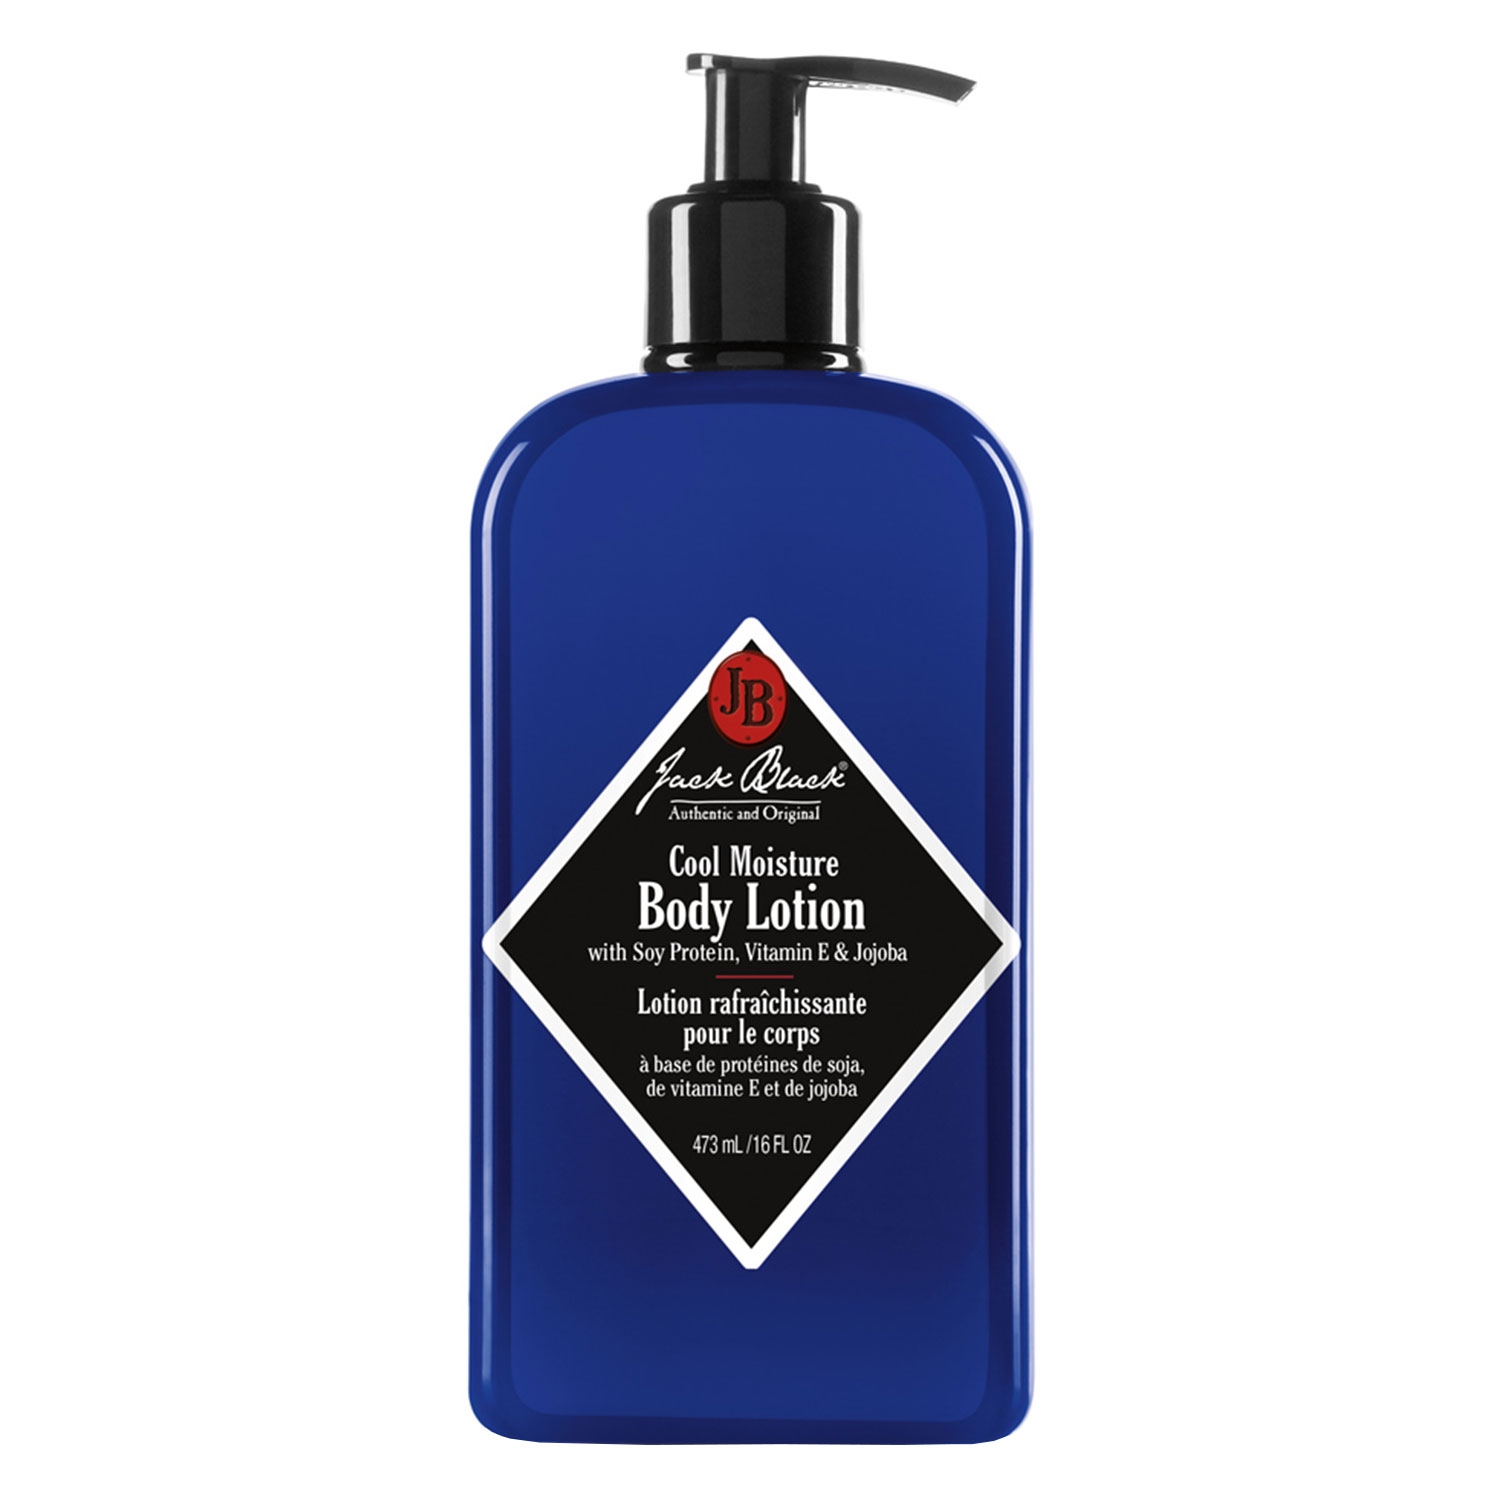 Product image from Jack Black - Cool Moisture Body Lotion